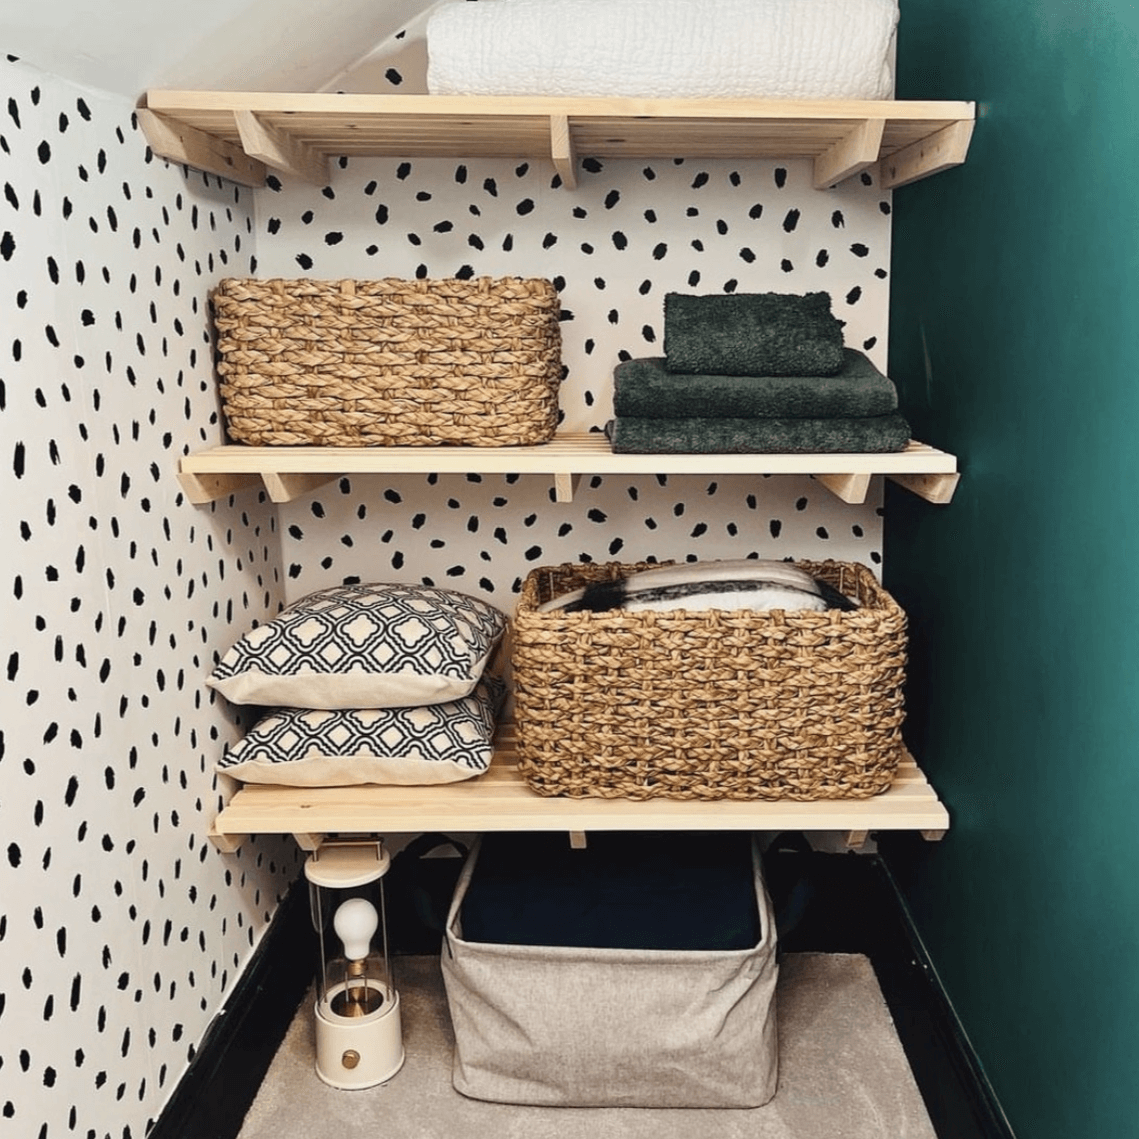 Airing Cupboard Wooden Slatted Shelves - 77 cm by 60 cm